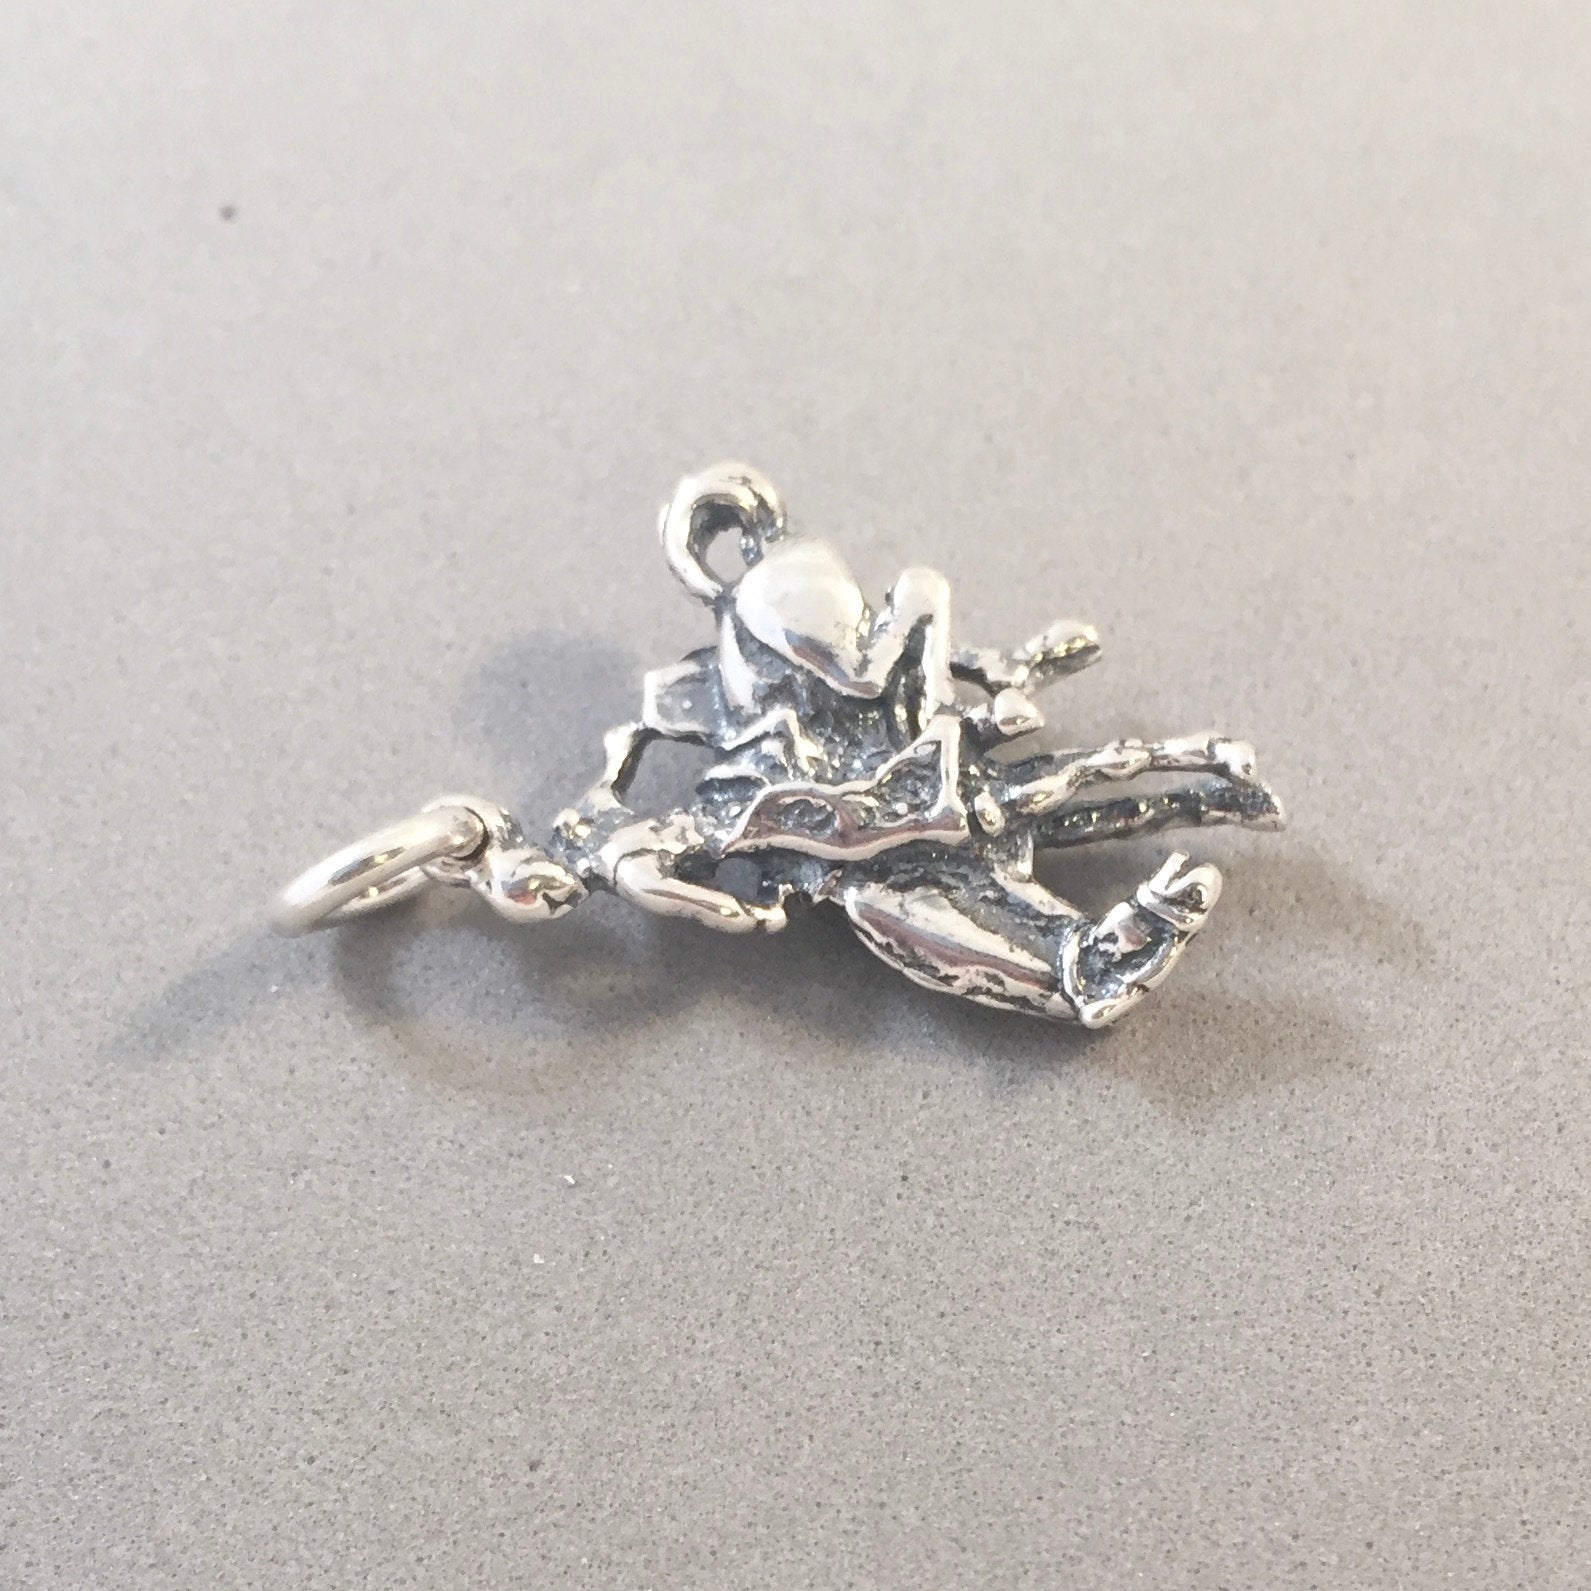 RODEO RIDER .925 Sterling Silver 3-D Charm Pendant Cowboy Cowgirl Buck ...